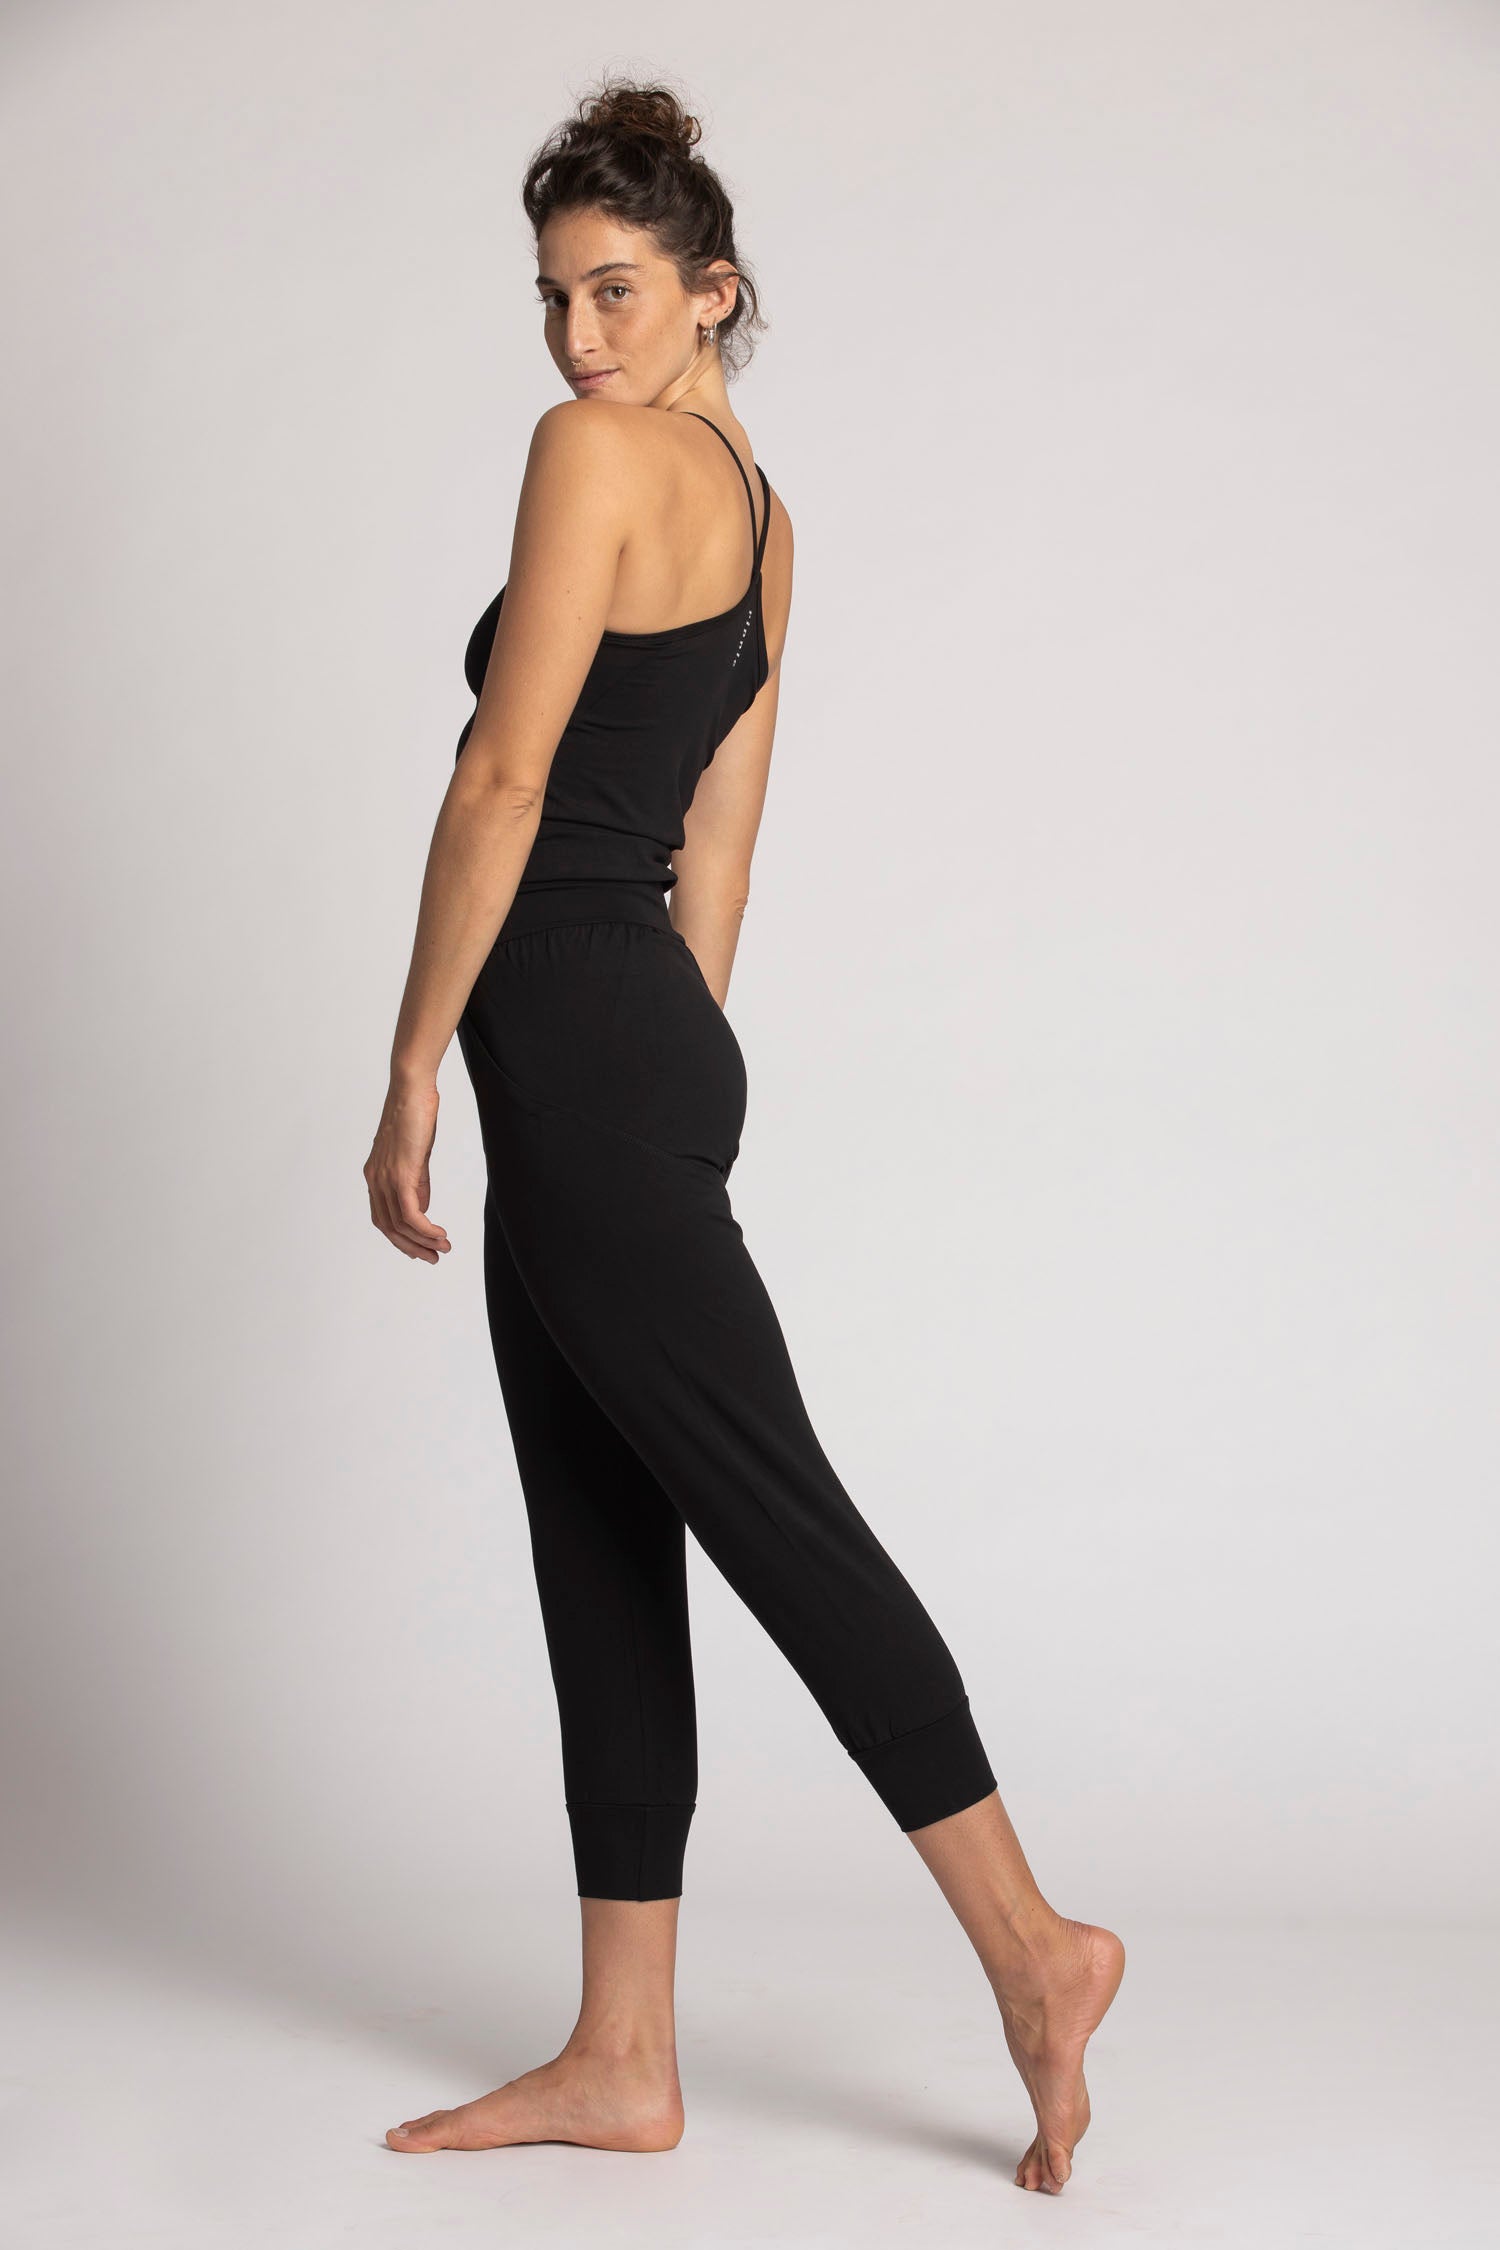 Sporty Yoga Yoga Jumpsuit With Padding For Women Short Lycra Fitness  Overalls And Gym Sets Womens Gym Outfit From Diao09, $17.54